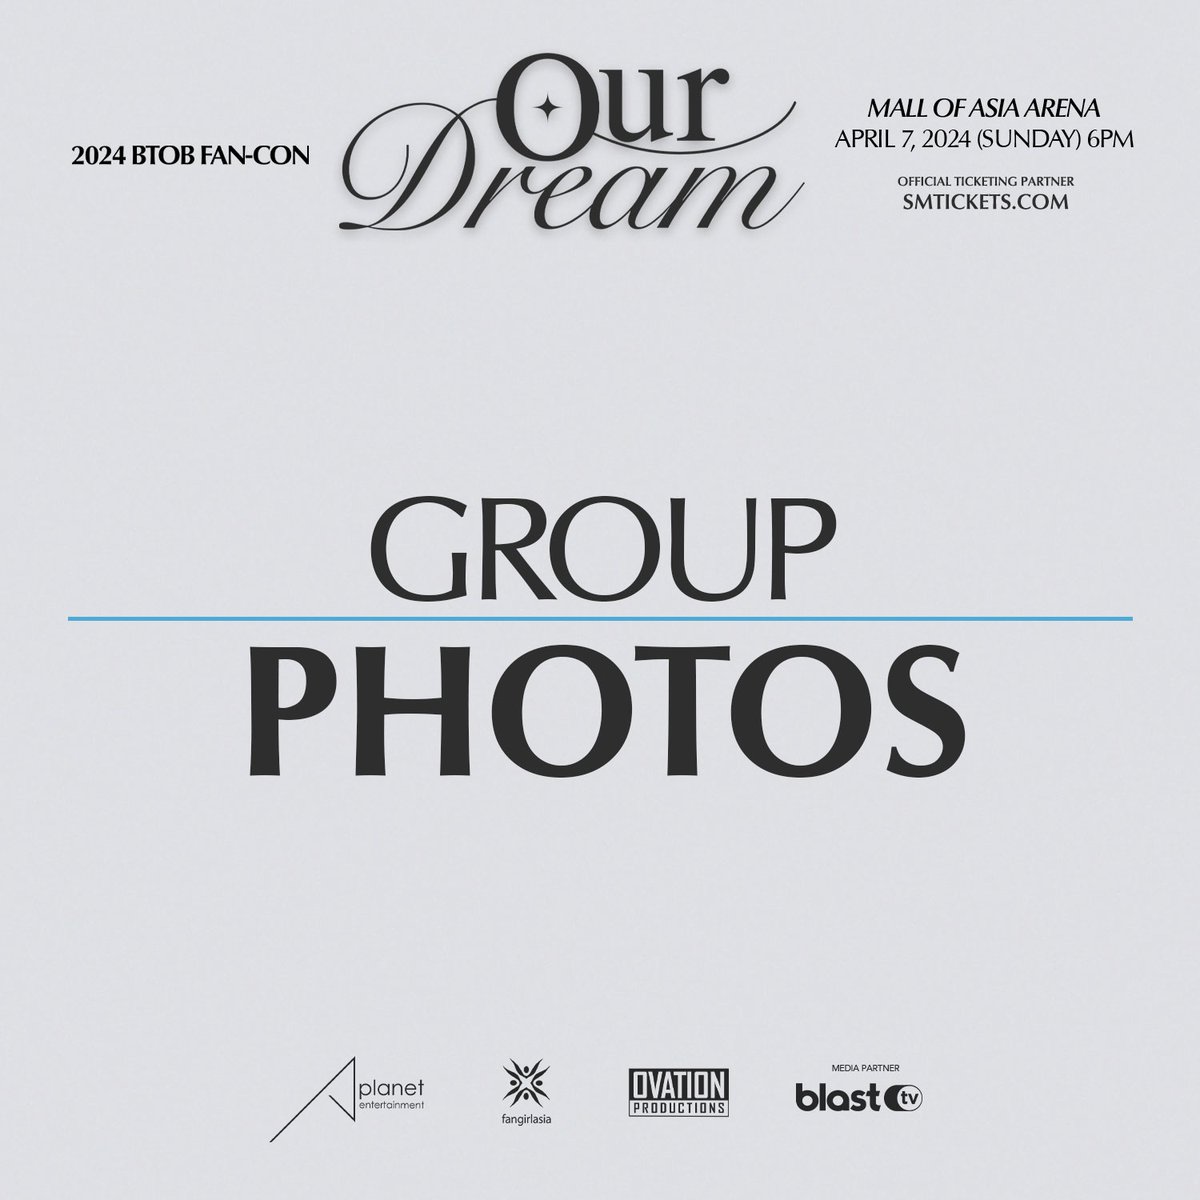 Hey Philippine Melody! We know it's hard to move on and the post-concert blues are rough, but here's something to lift your spirits up! 💙 Let's keep the dream alive with these group photos from the 2024 BTOB Fan-Con Our Dream in Manila! Download here: bit.ly/BTOBManilaPhot……